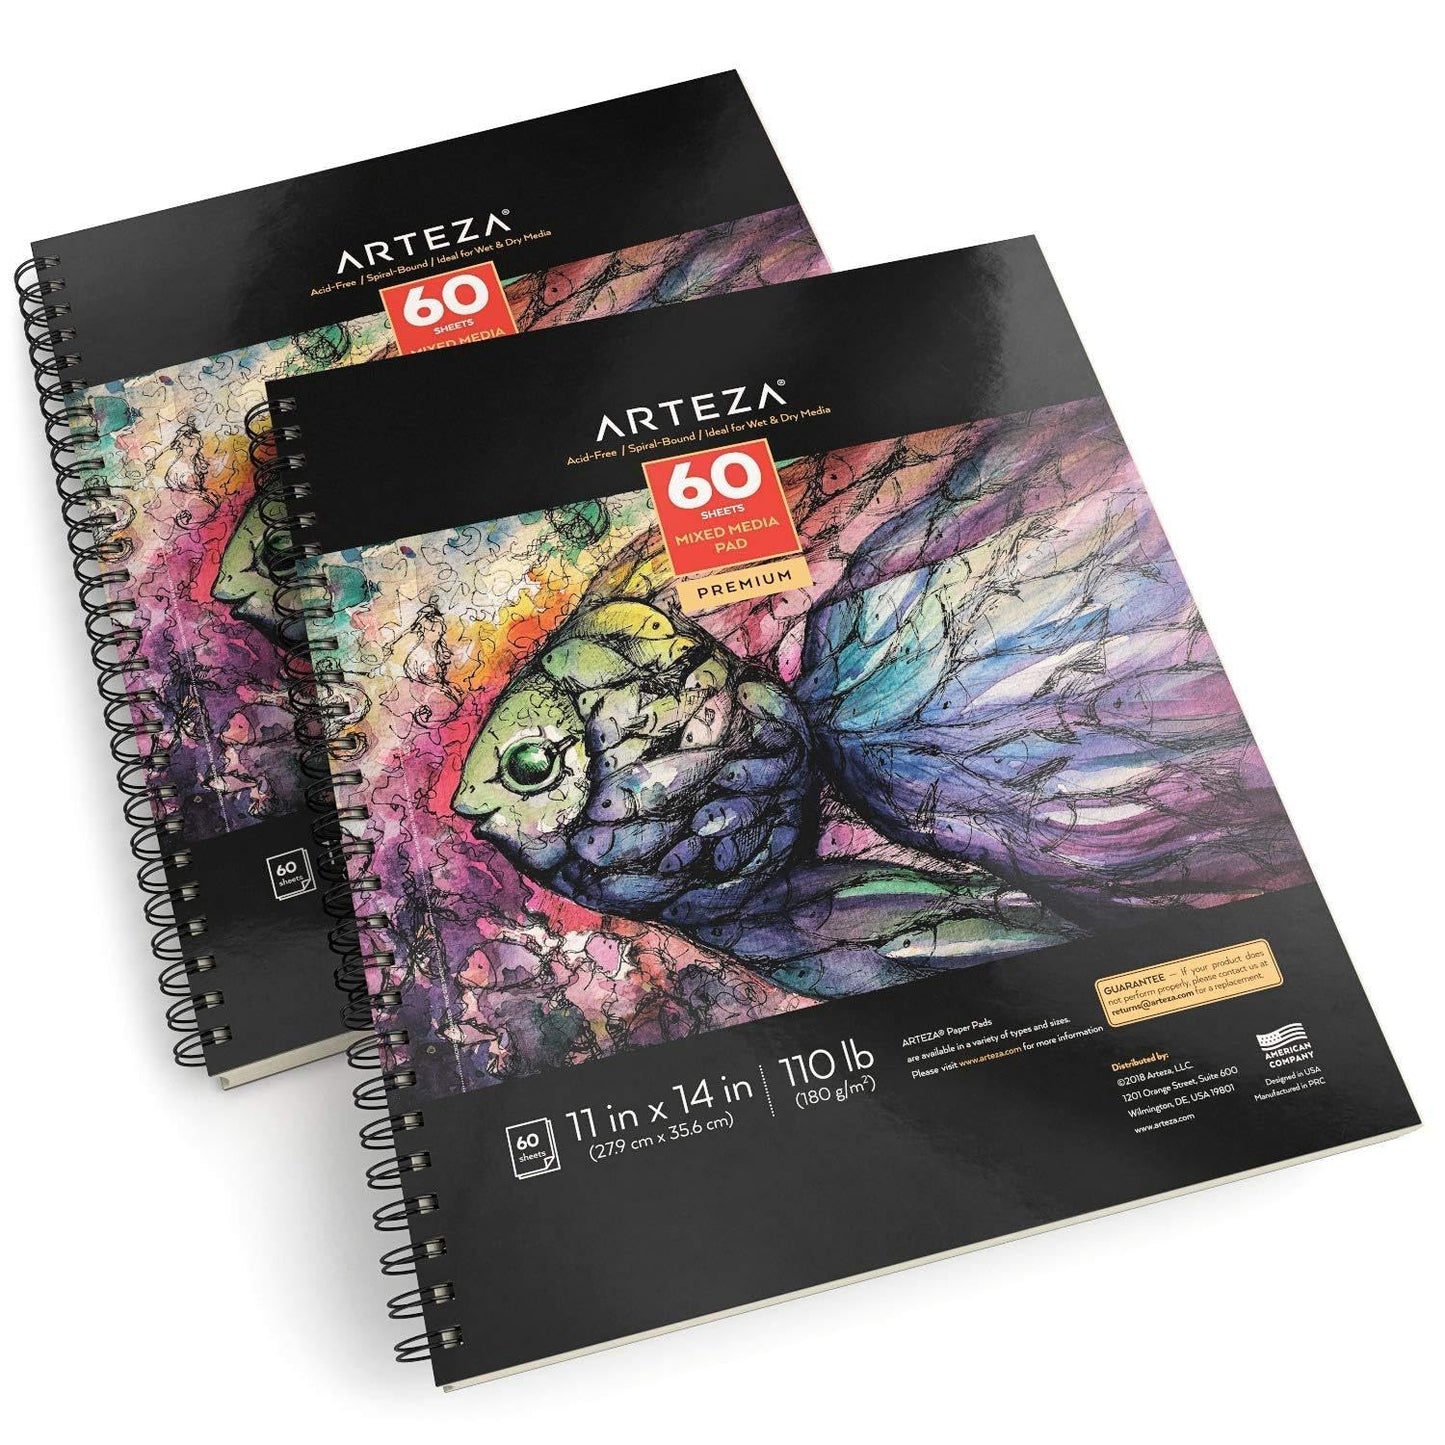 ARTEZA Mixed Media Sketchbook, 11 x 14 Inches, Pack of 2, 110lb/180gsm Mixed Media Paper, 120 Sheets, Spiral-Bound Multi Media Pads, Art Supplies for